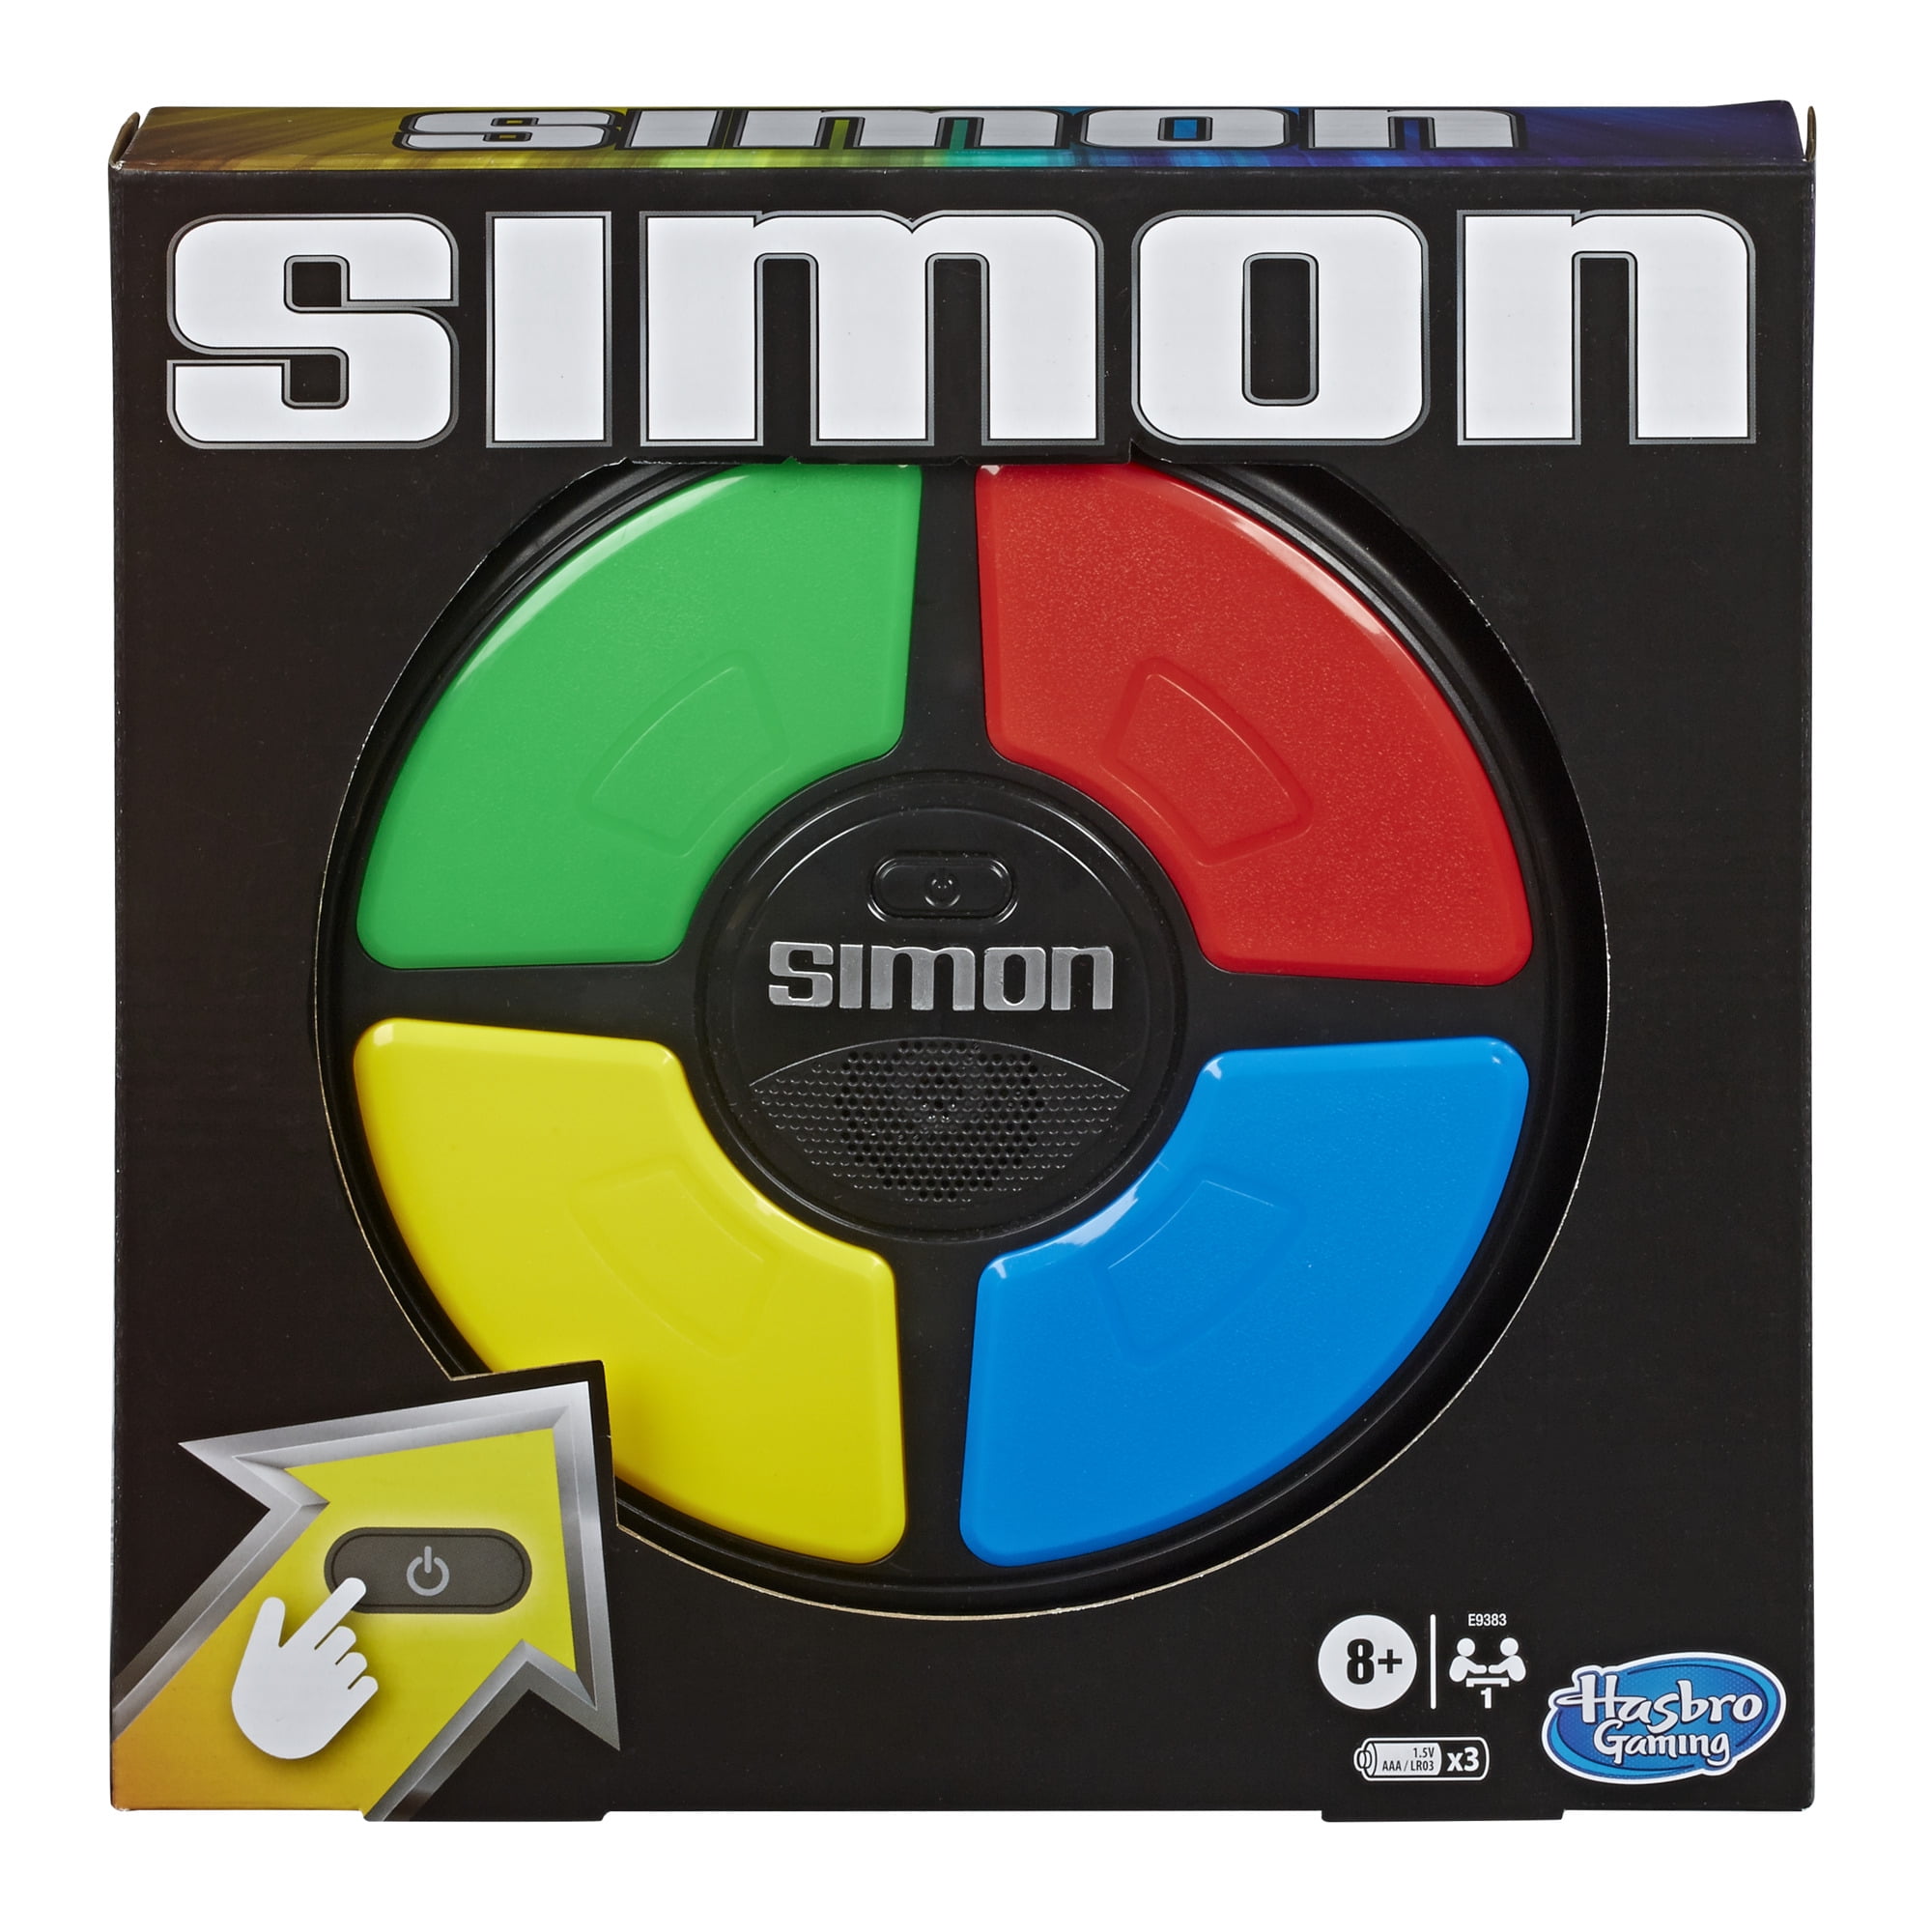 Hasbro A8766 Simon Swipe Game Childrens Electronics for sale online 